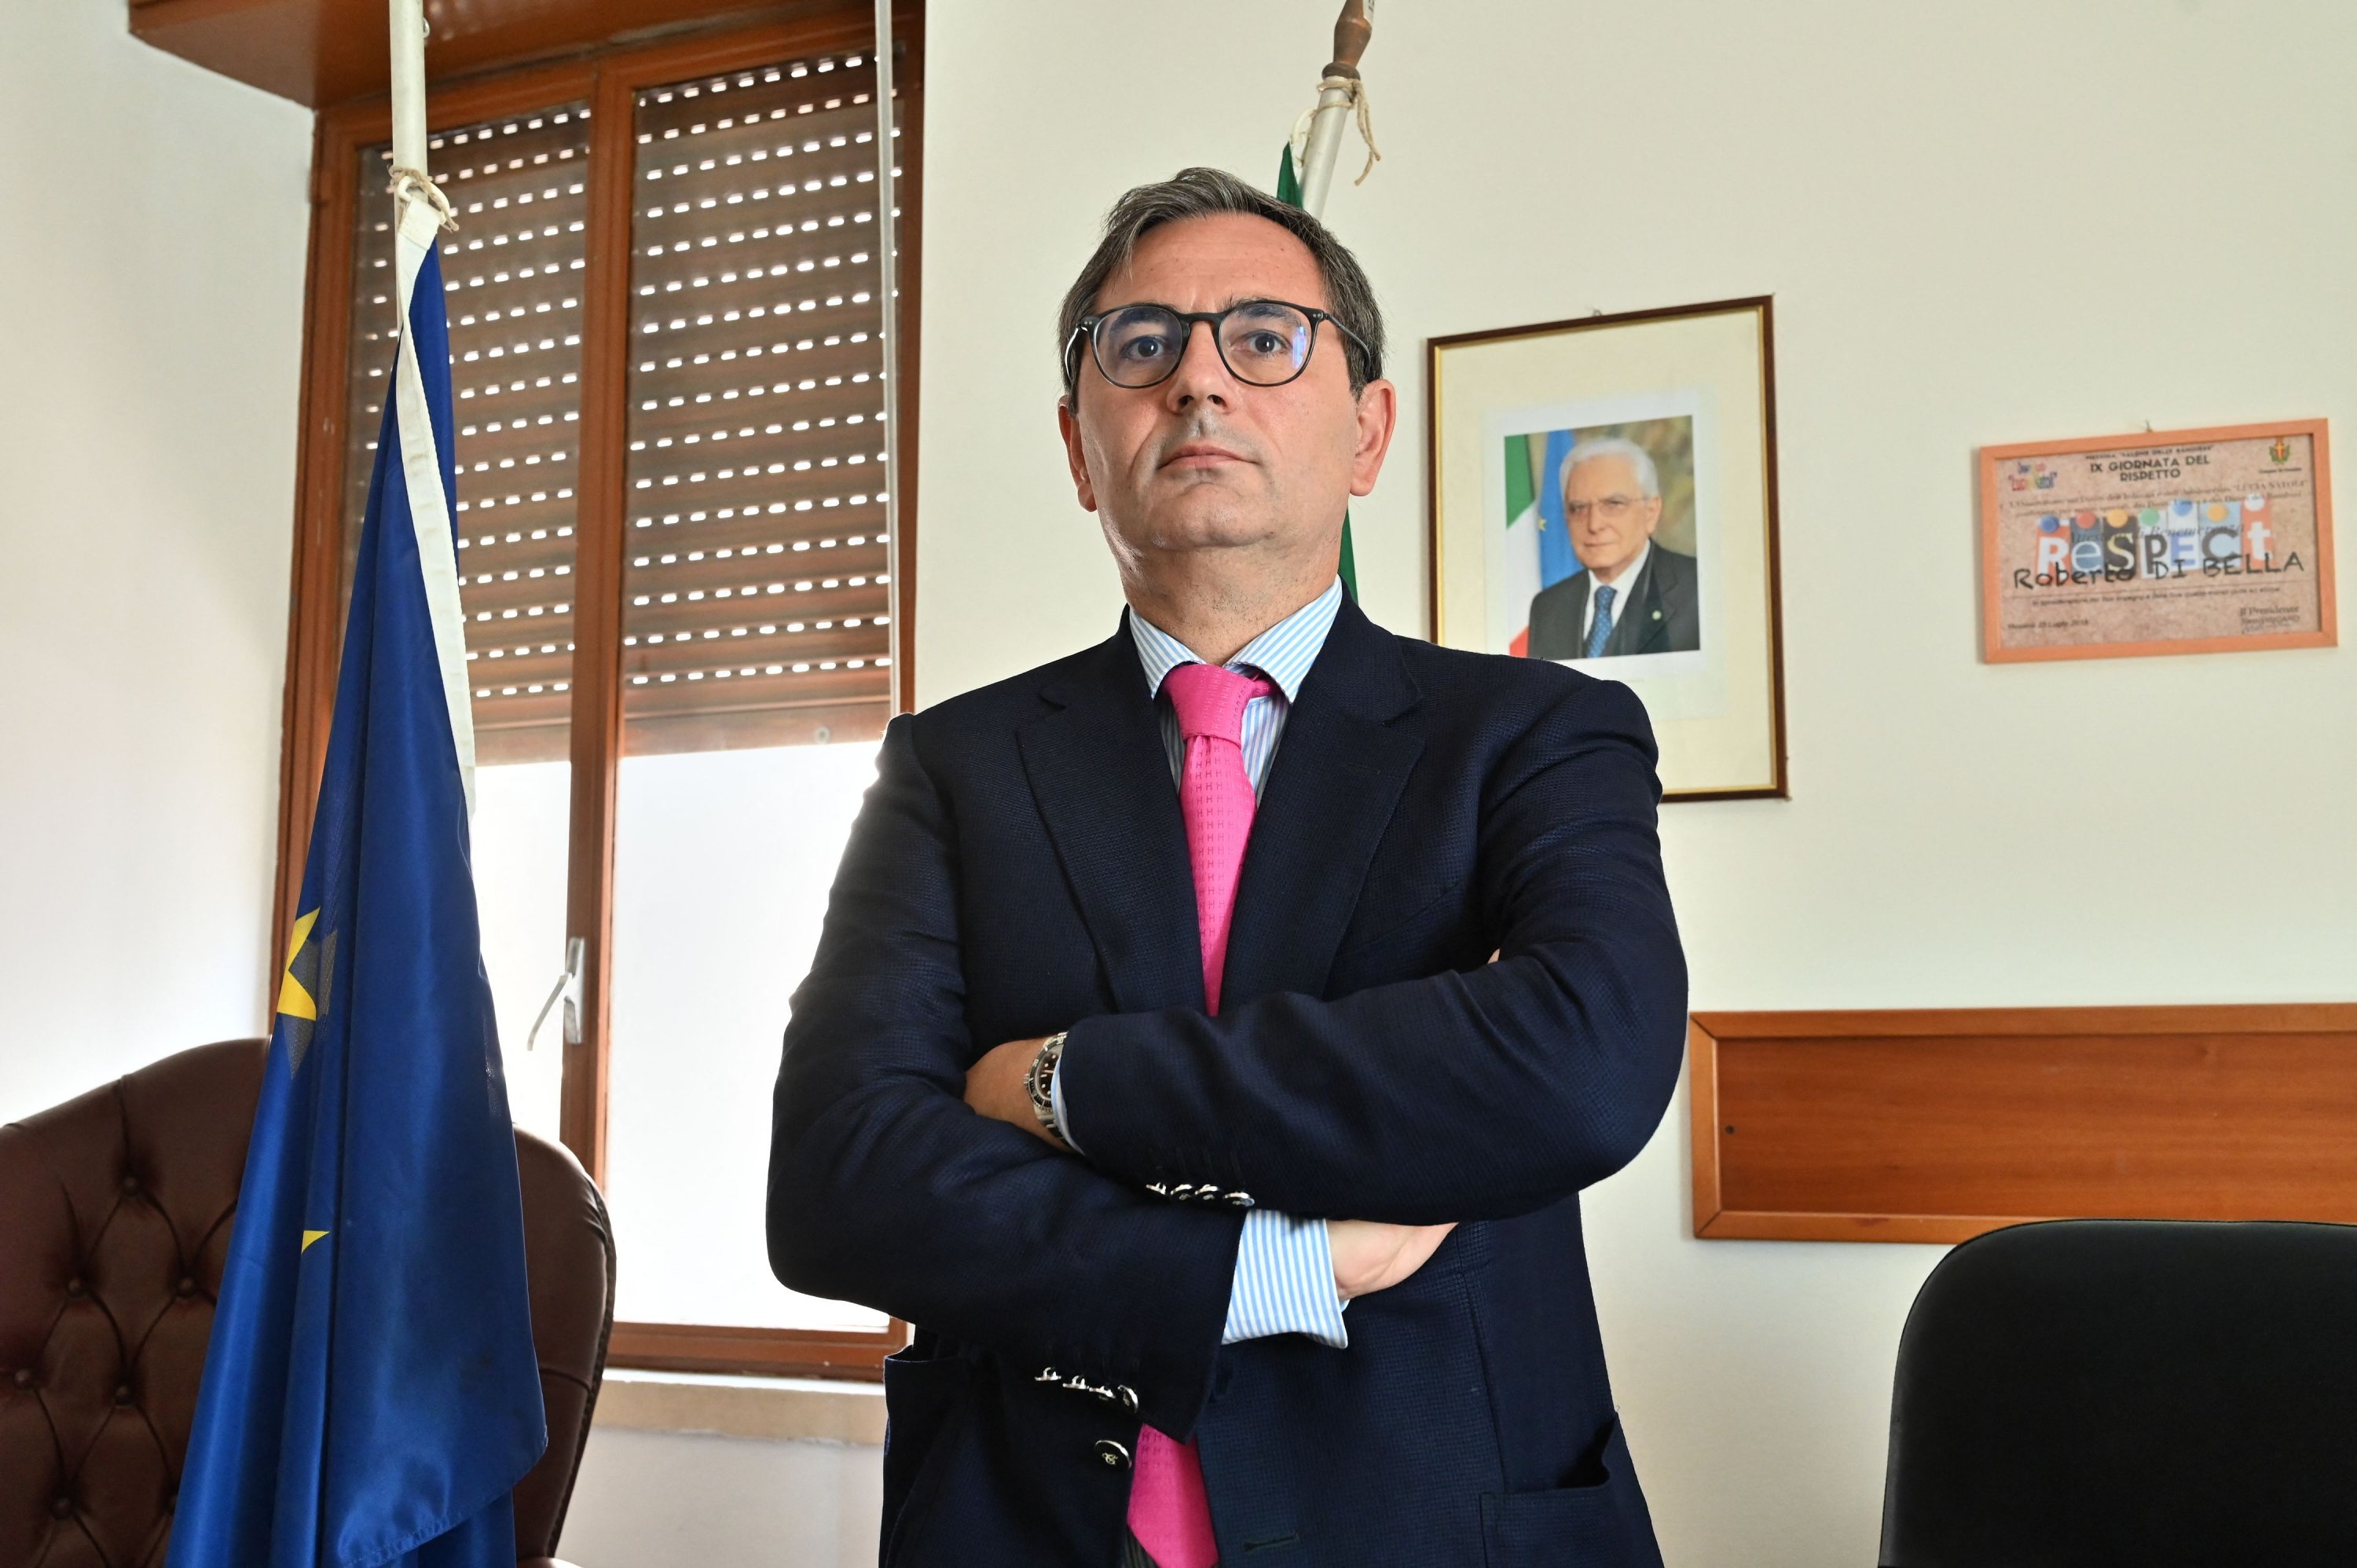 Italian Judge Roberto Di Bella poses during an interview at his office in the Juvenile Court in Reggio Calabria, Calabria, southern Italy, July 7, 2020. (AFP File Photo)